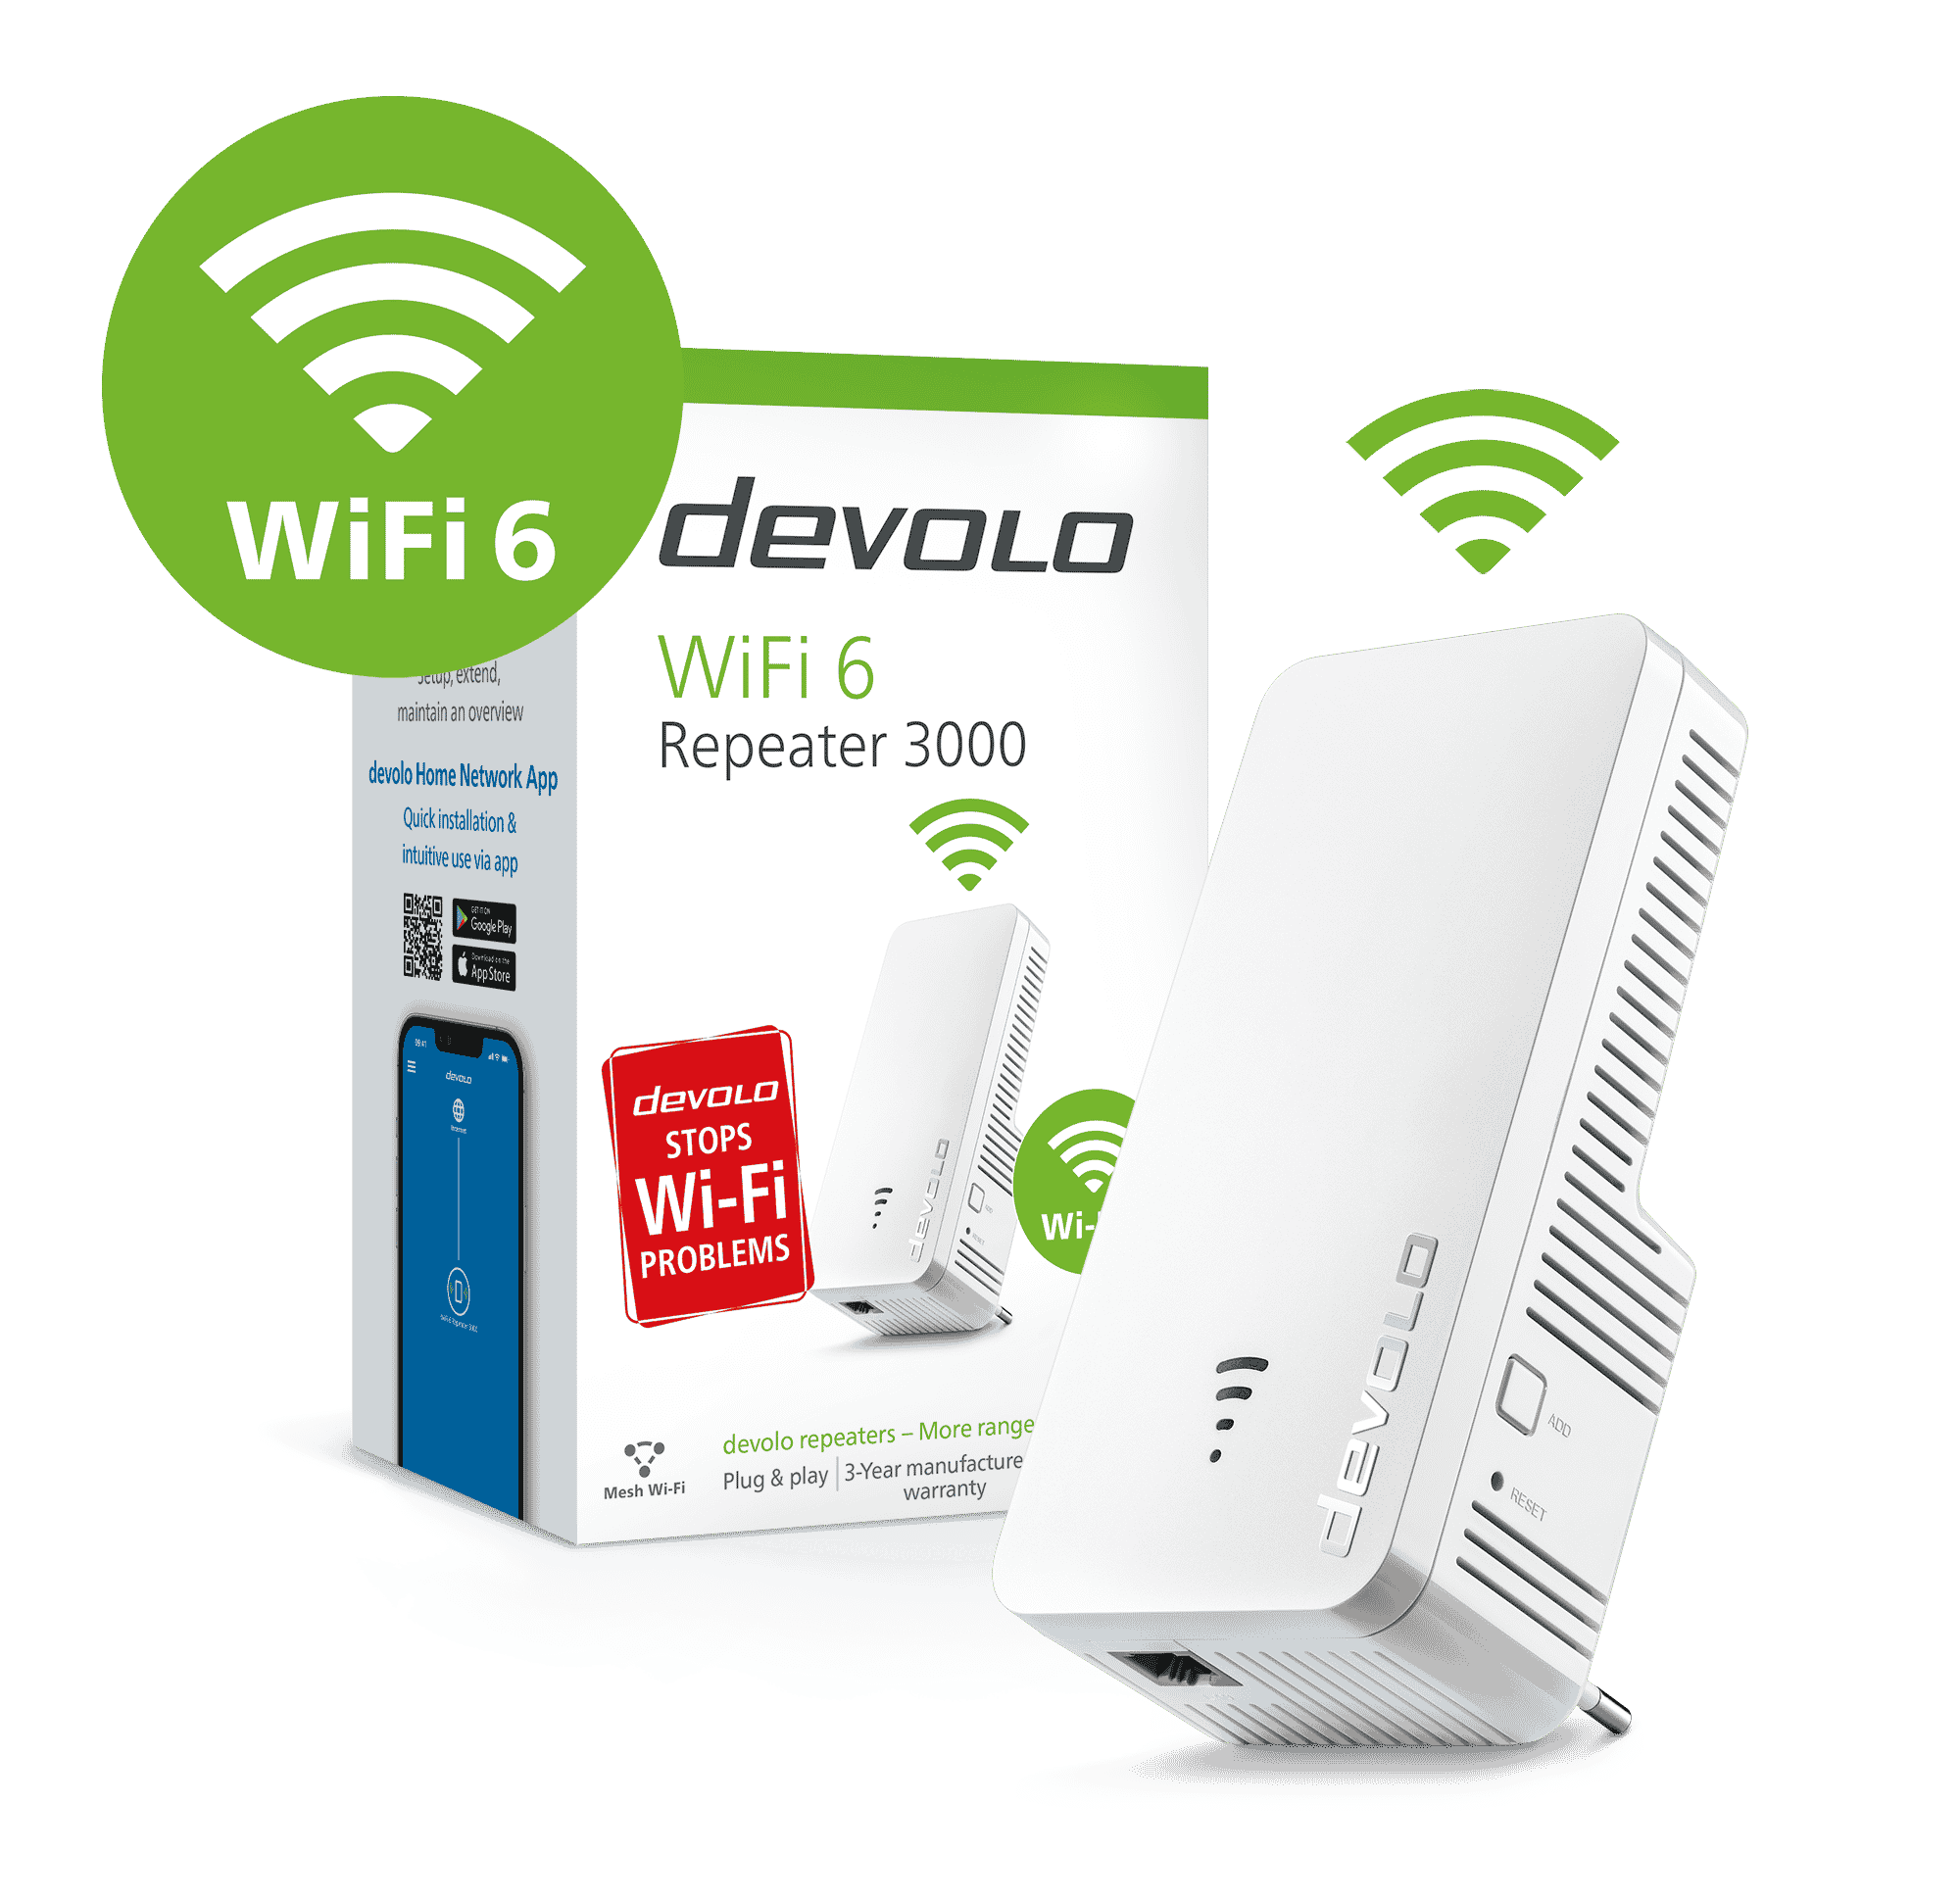 devolo WiFi 6 Repeater 3000 and WiFi 6 Repeater 5400 available